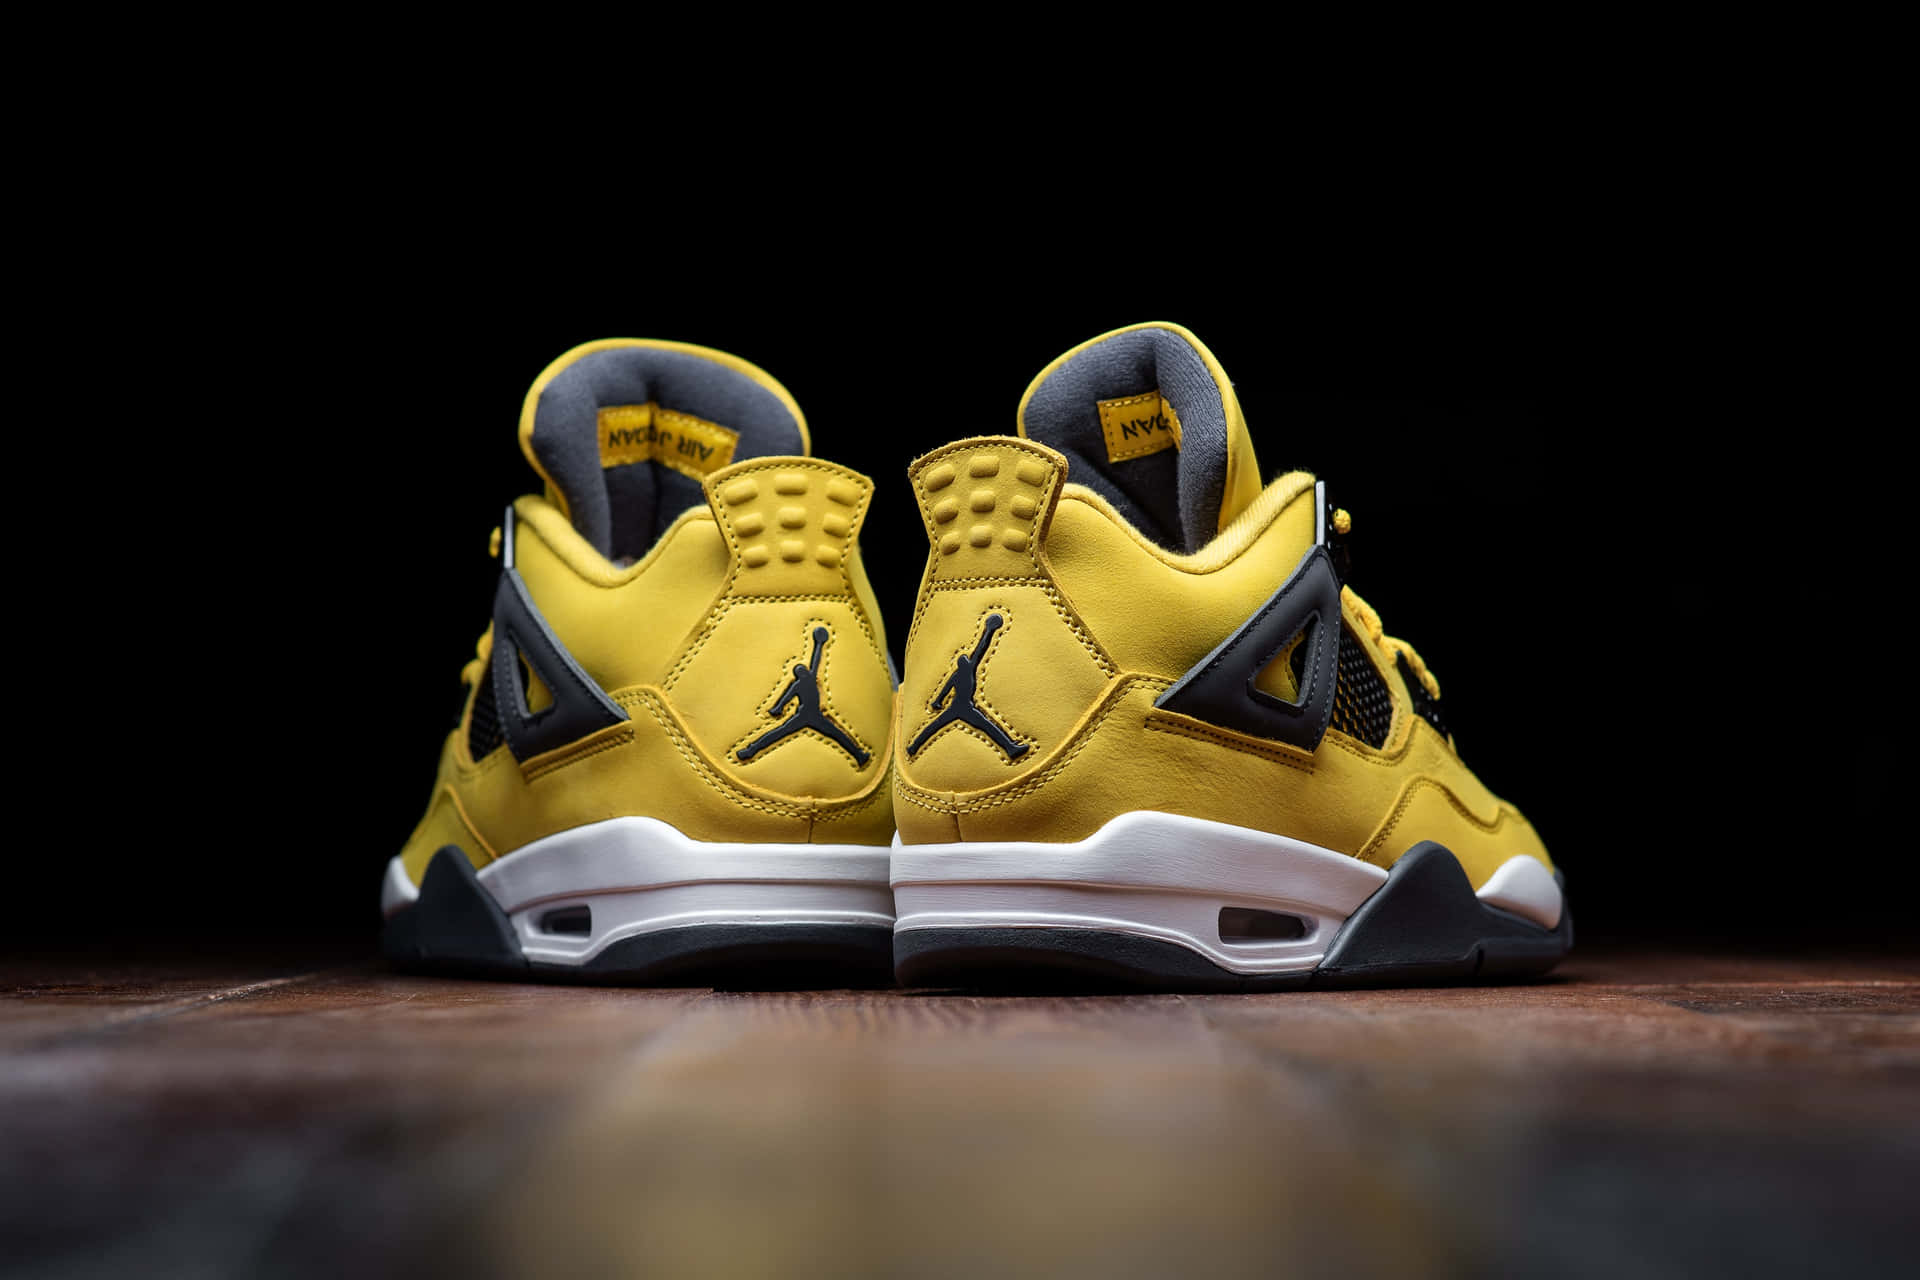 Image  Brighten Your Street Style with These Lit Yellow Jordan Sneakers Wallpaper